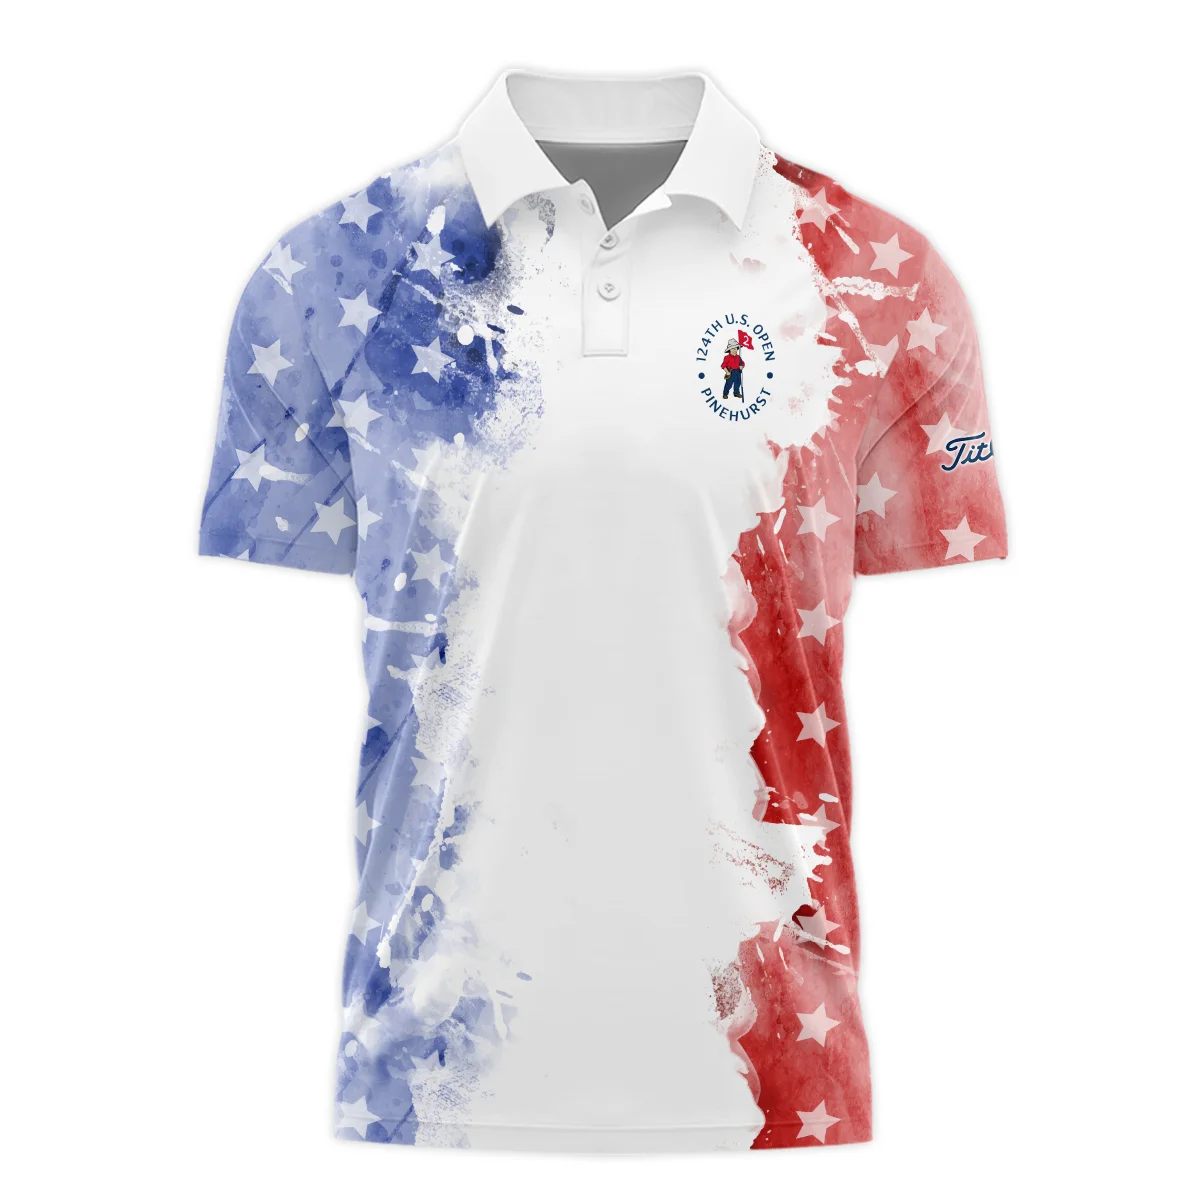 124th U.S. Open Pinehurst Special Version Titleist Polo Shirt Blue Red Watercolor Polo Shirt For Men